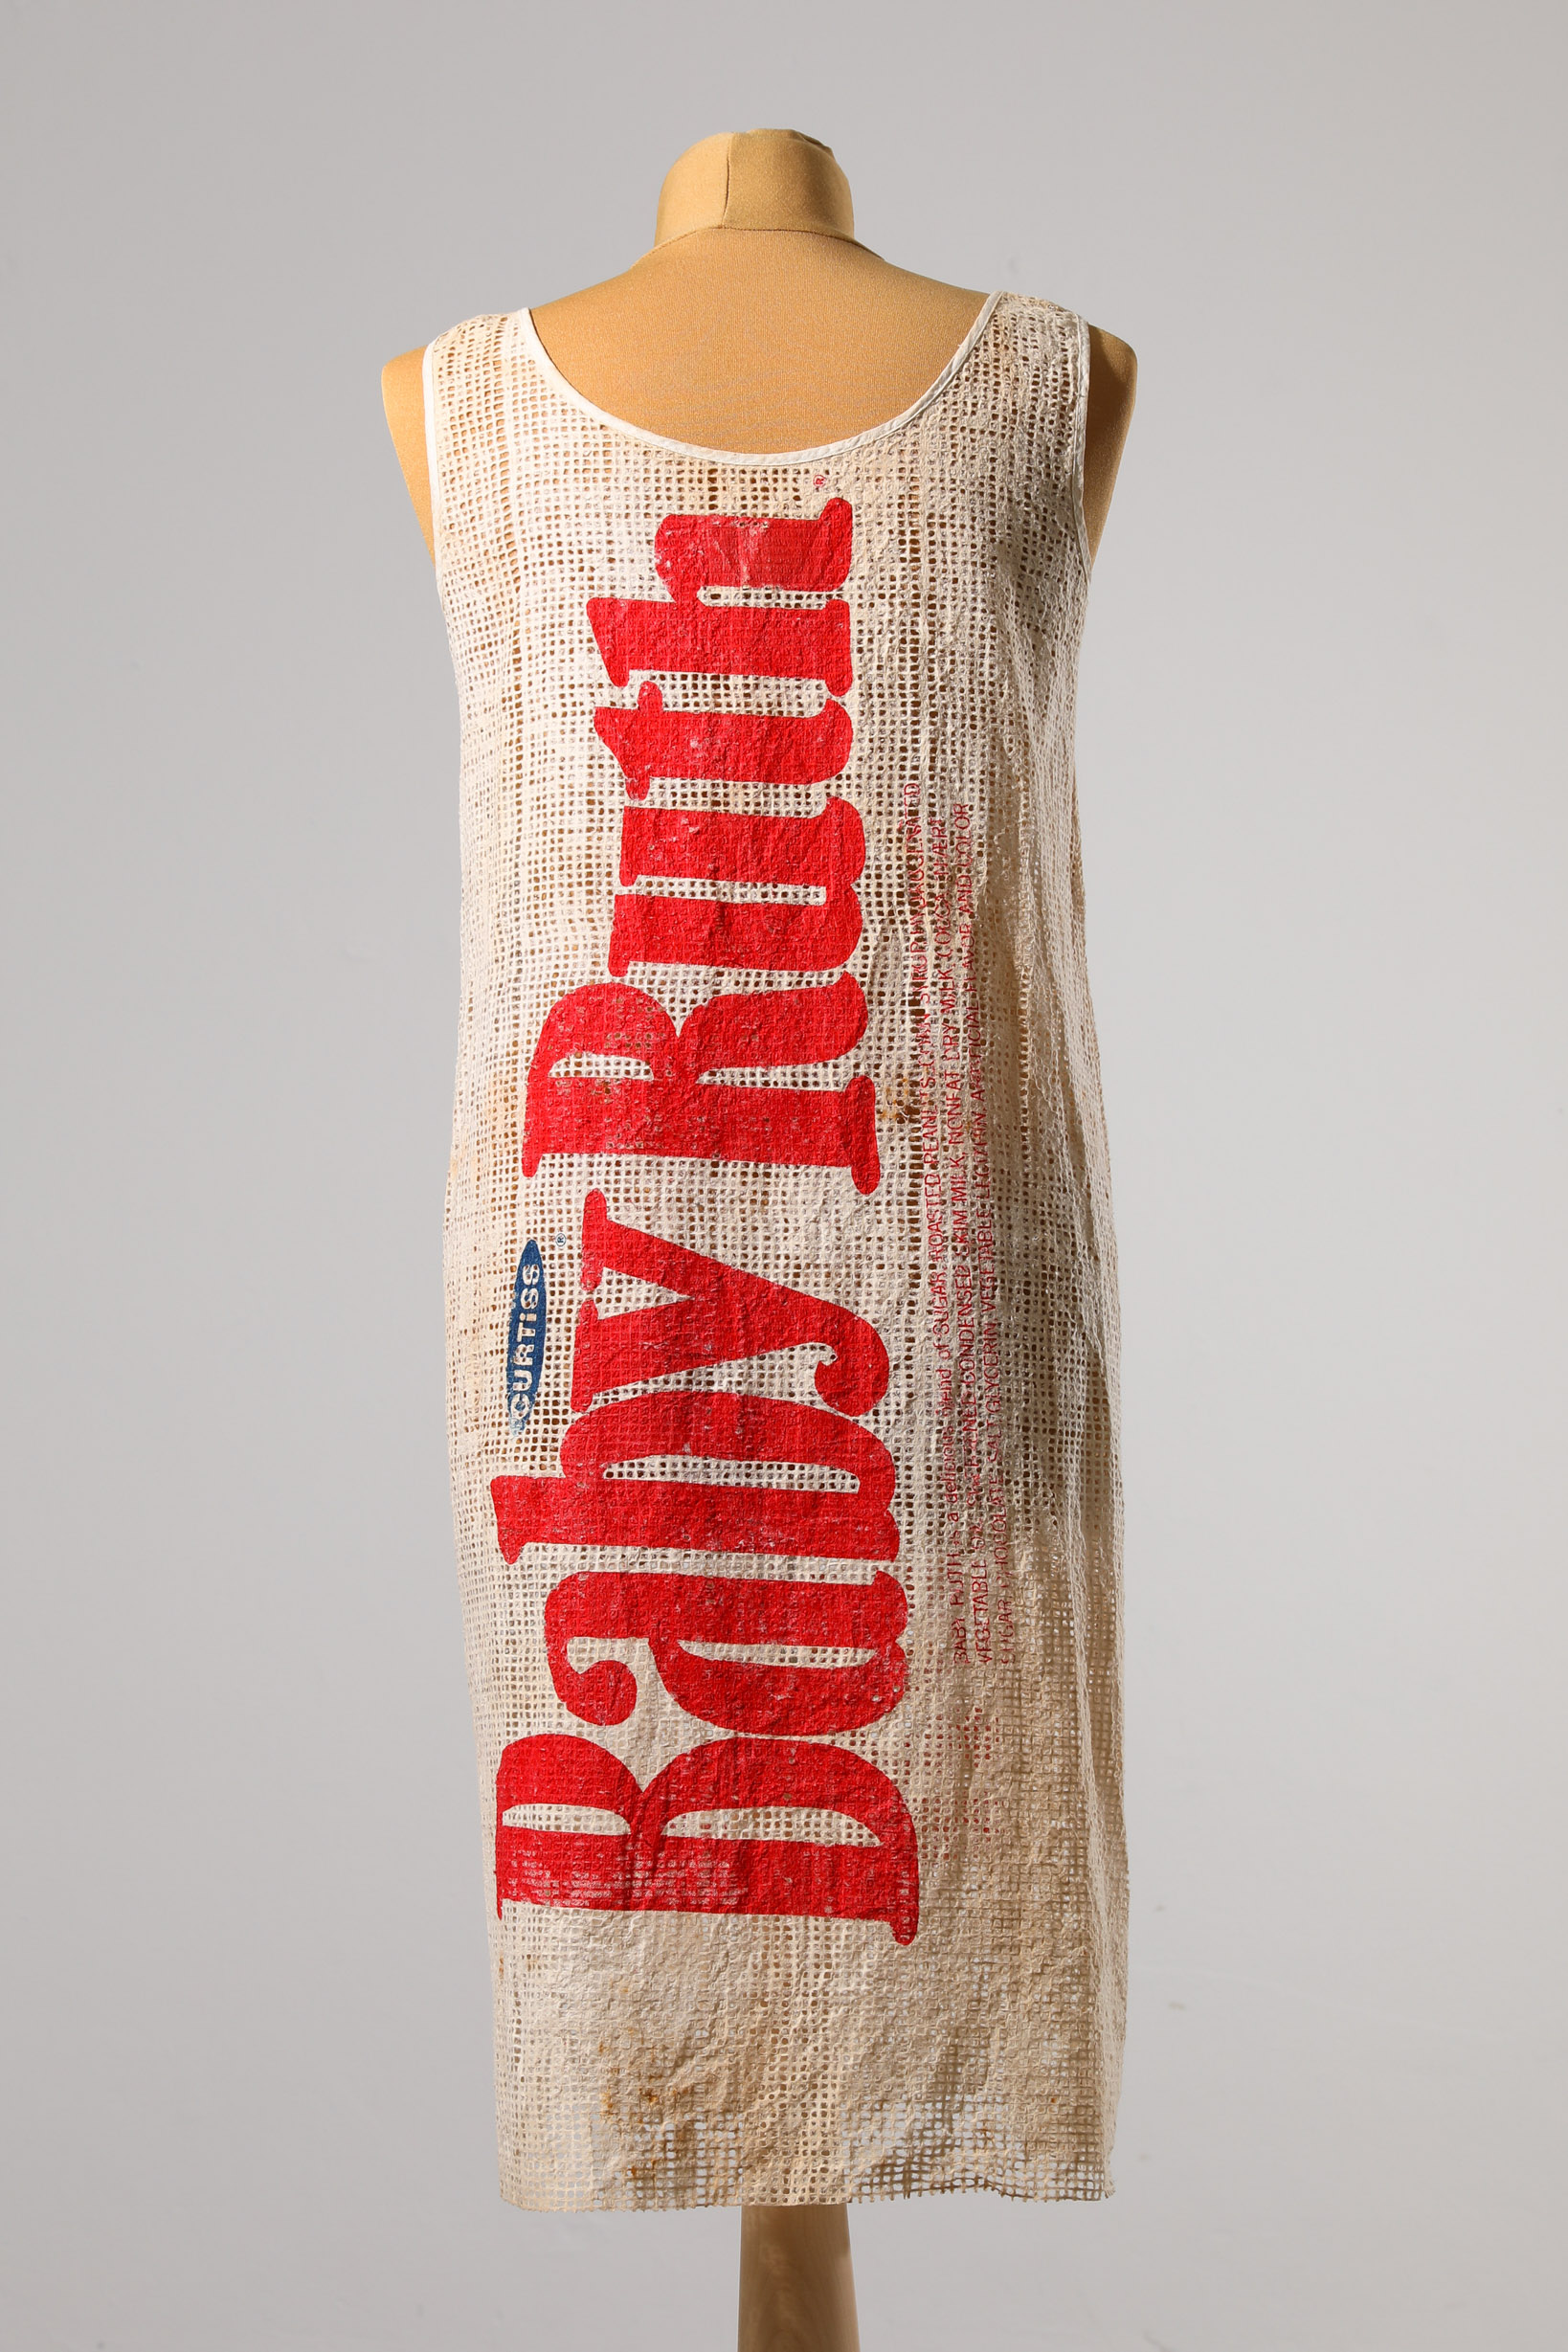 Mel Ramos, Candy - Baby Ruth and Paper Dress - Image 5 of 10